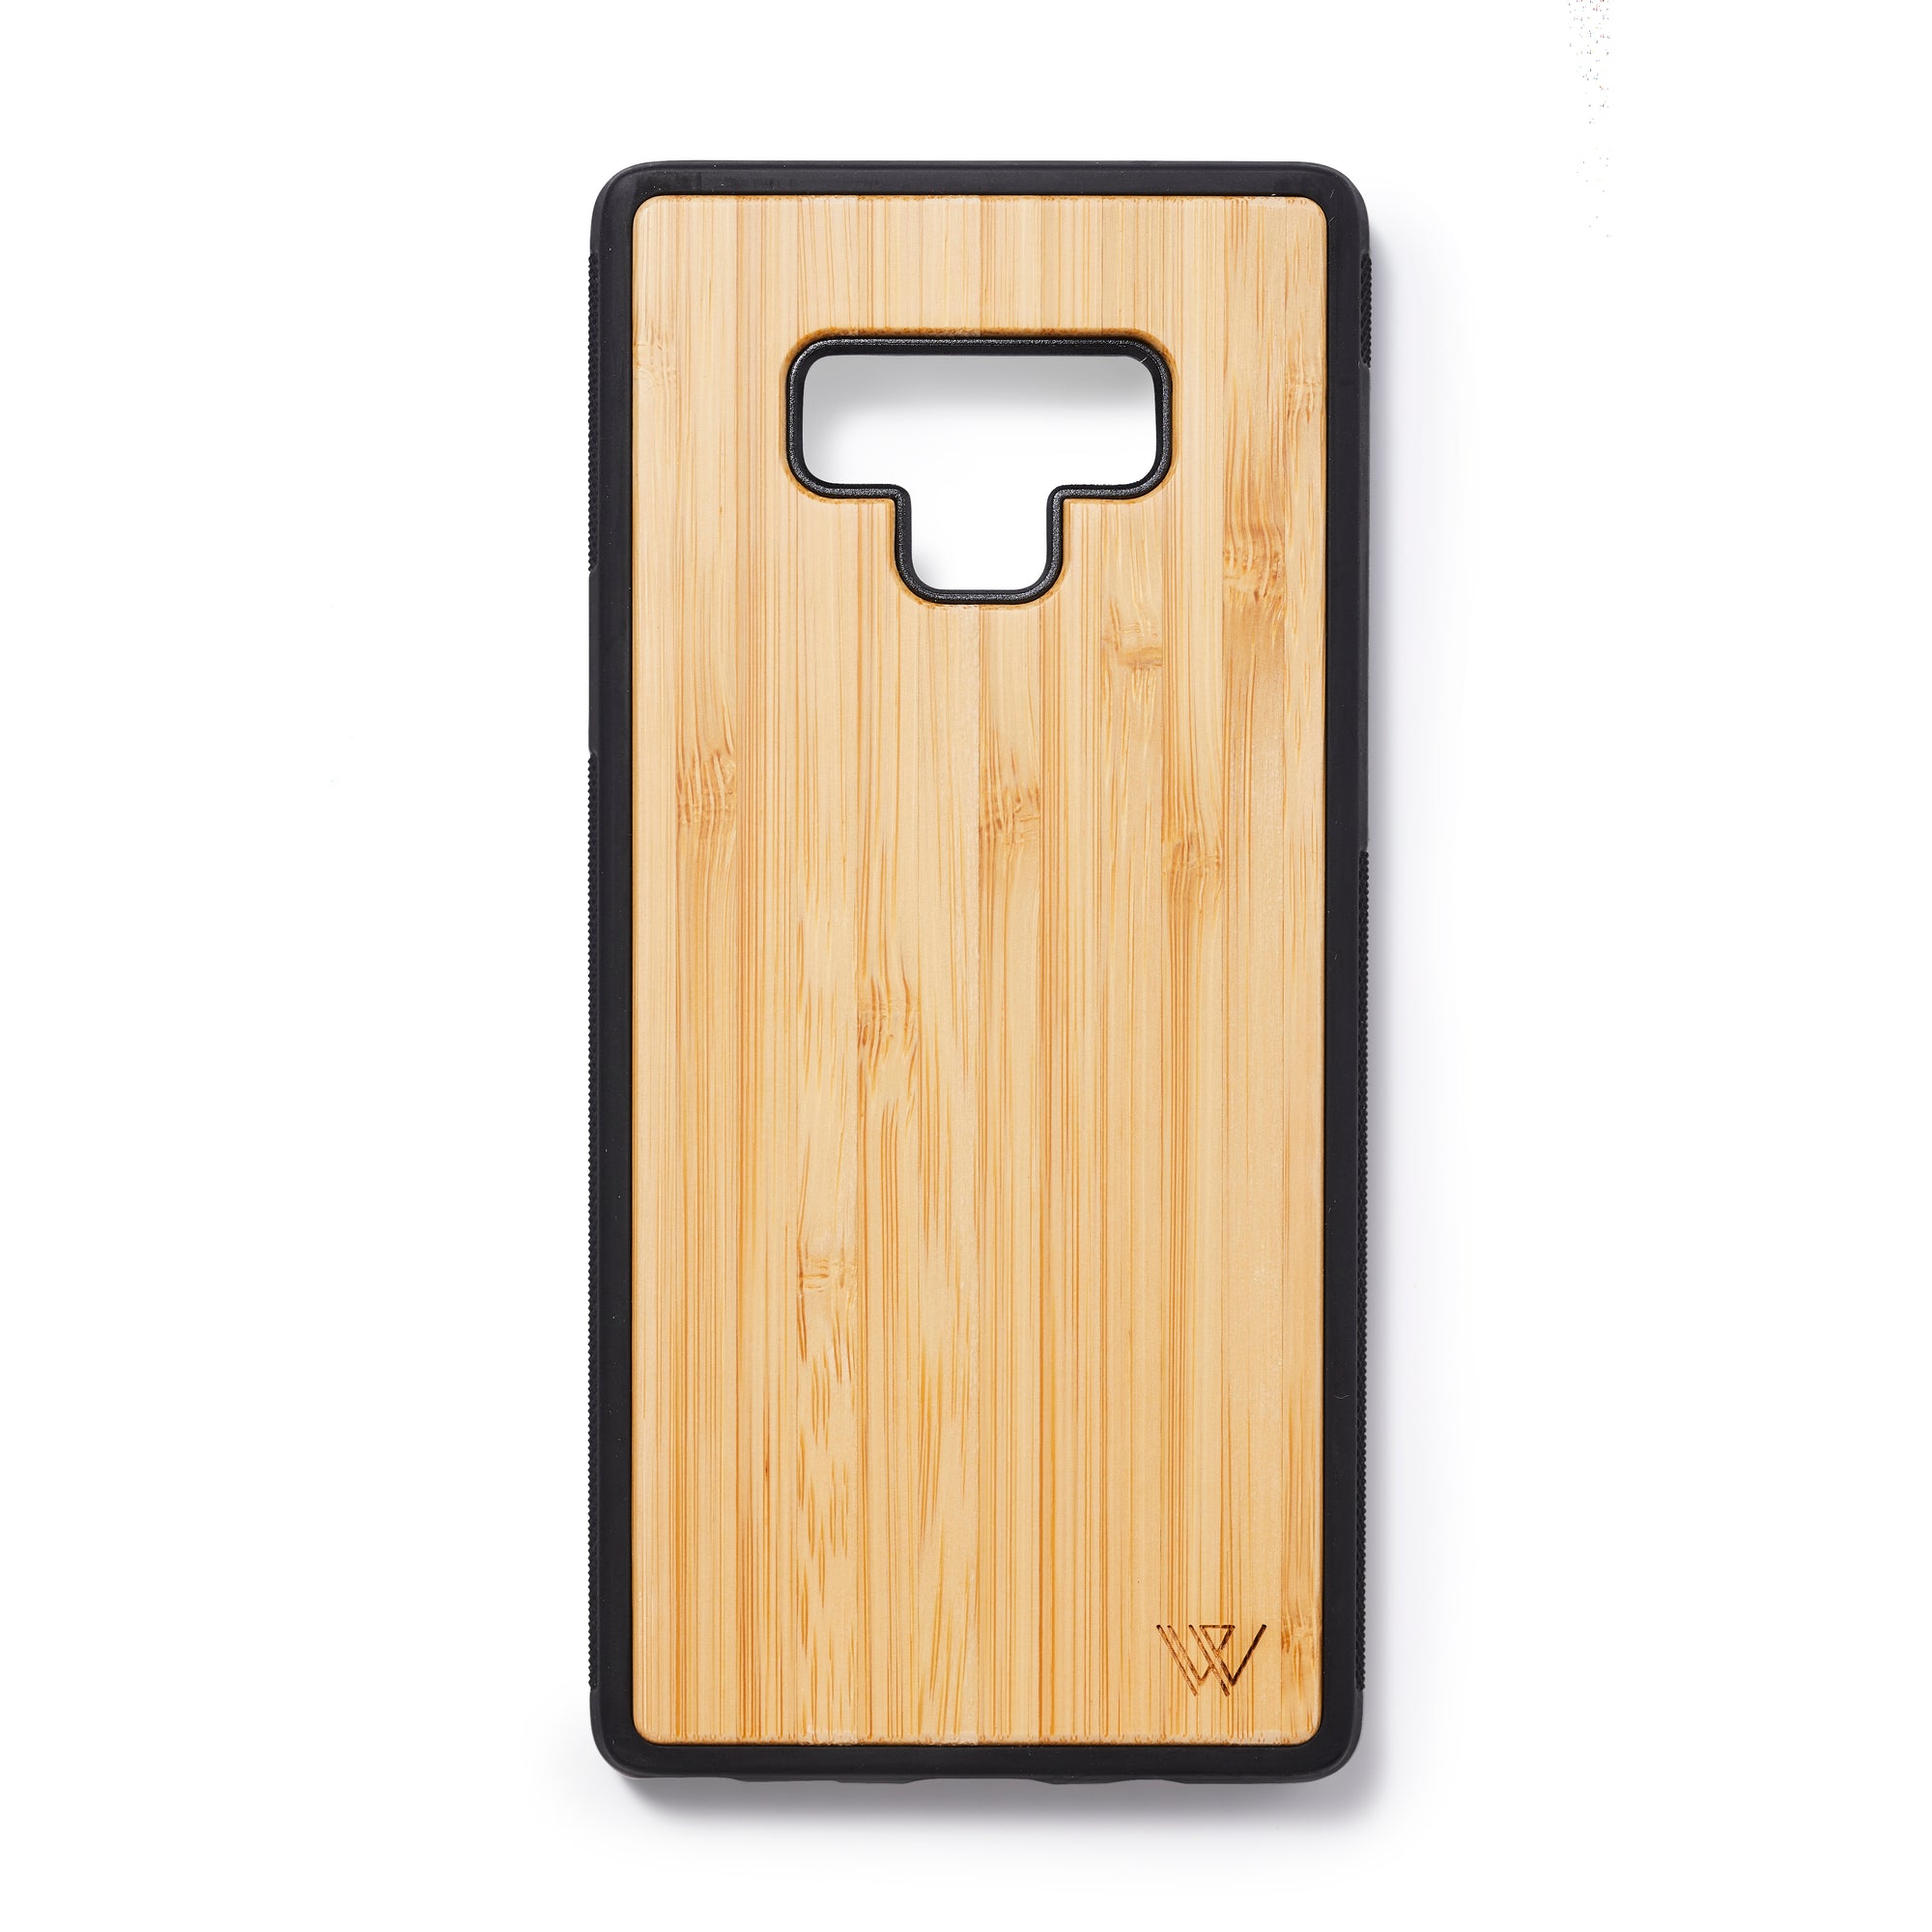 Wooden back case Samsung Note 9 bamboo - Woodstylz